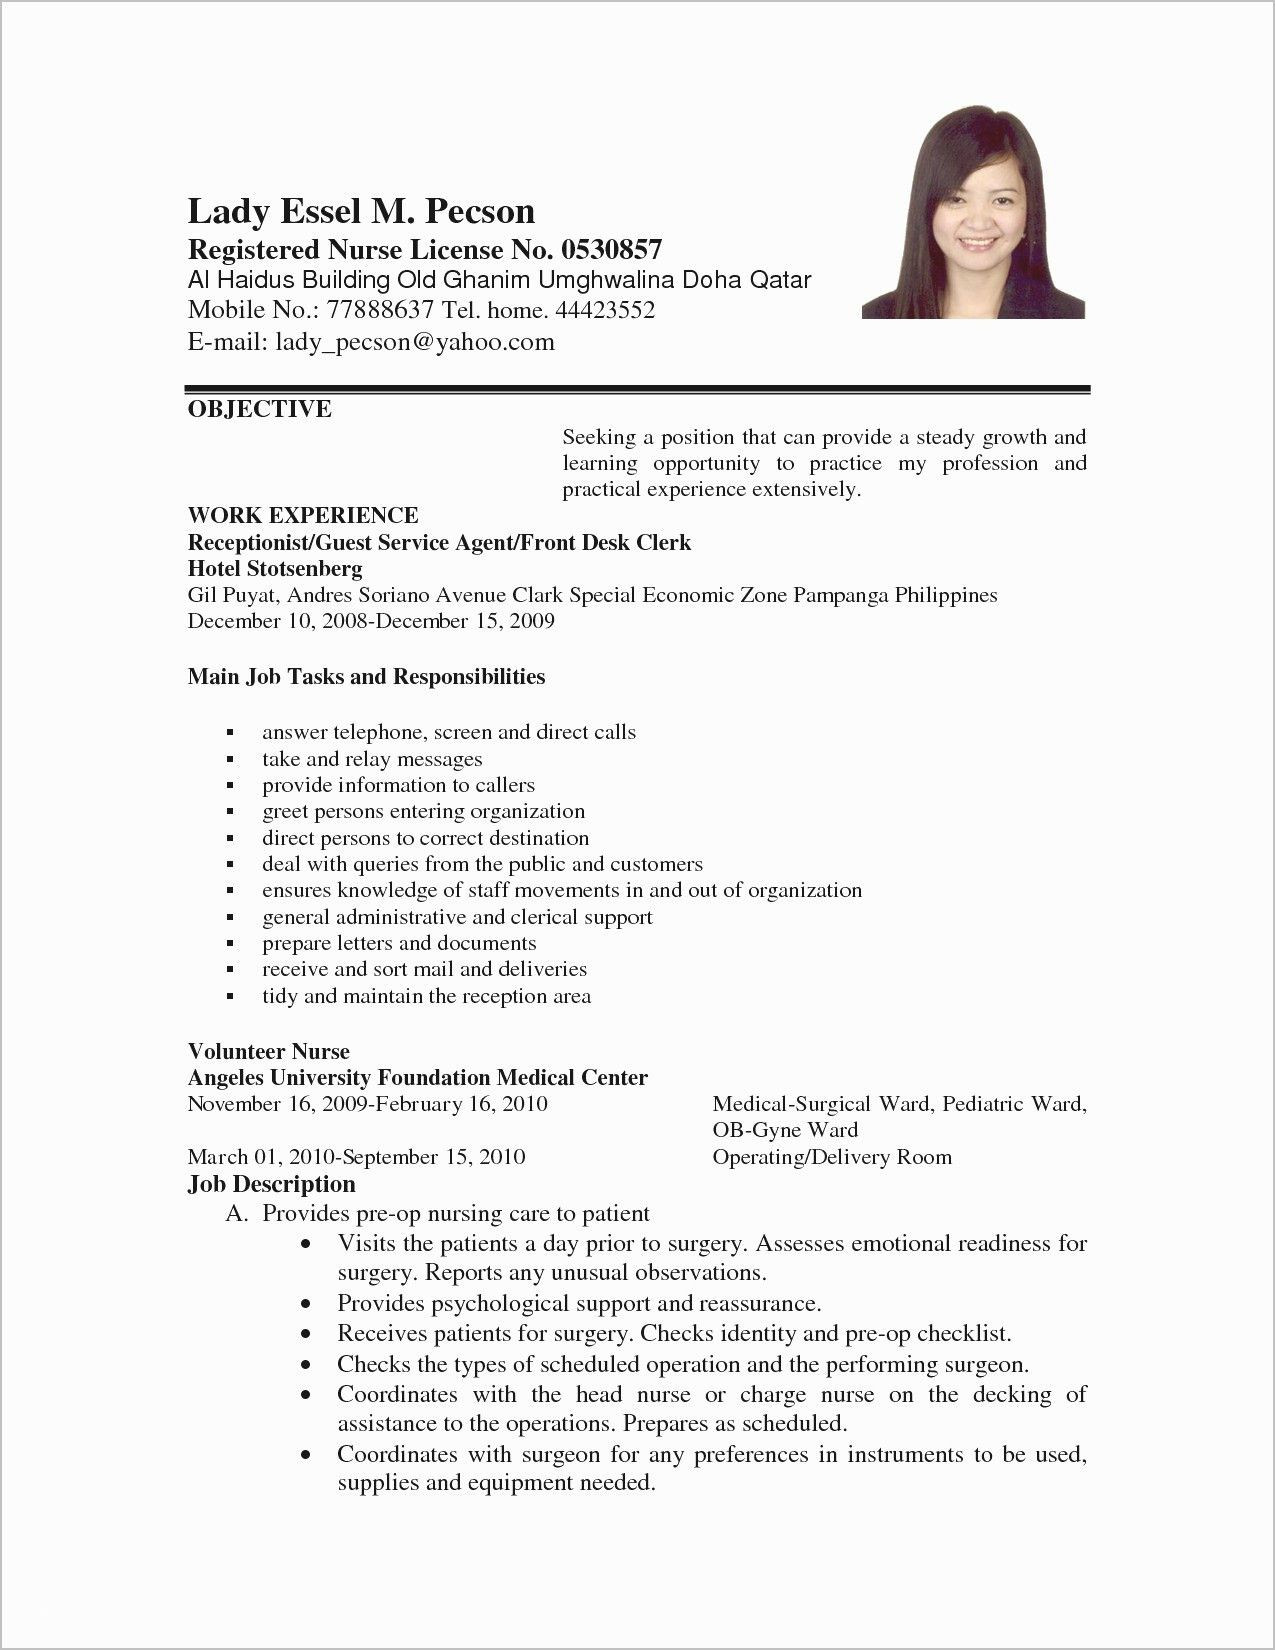 Sample Resume for Call Center Agent Applicant without Experience Resumes for Call Center Jobs – Ferel